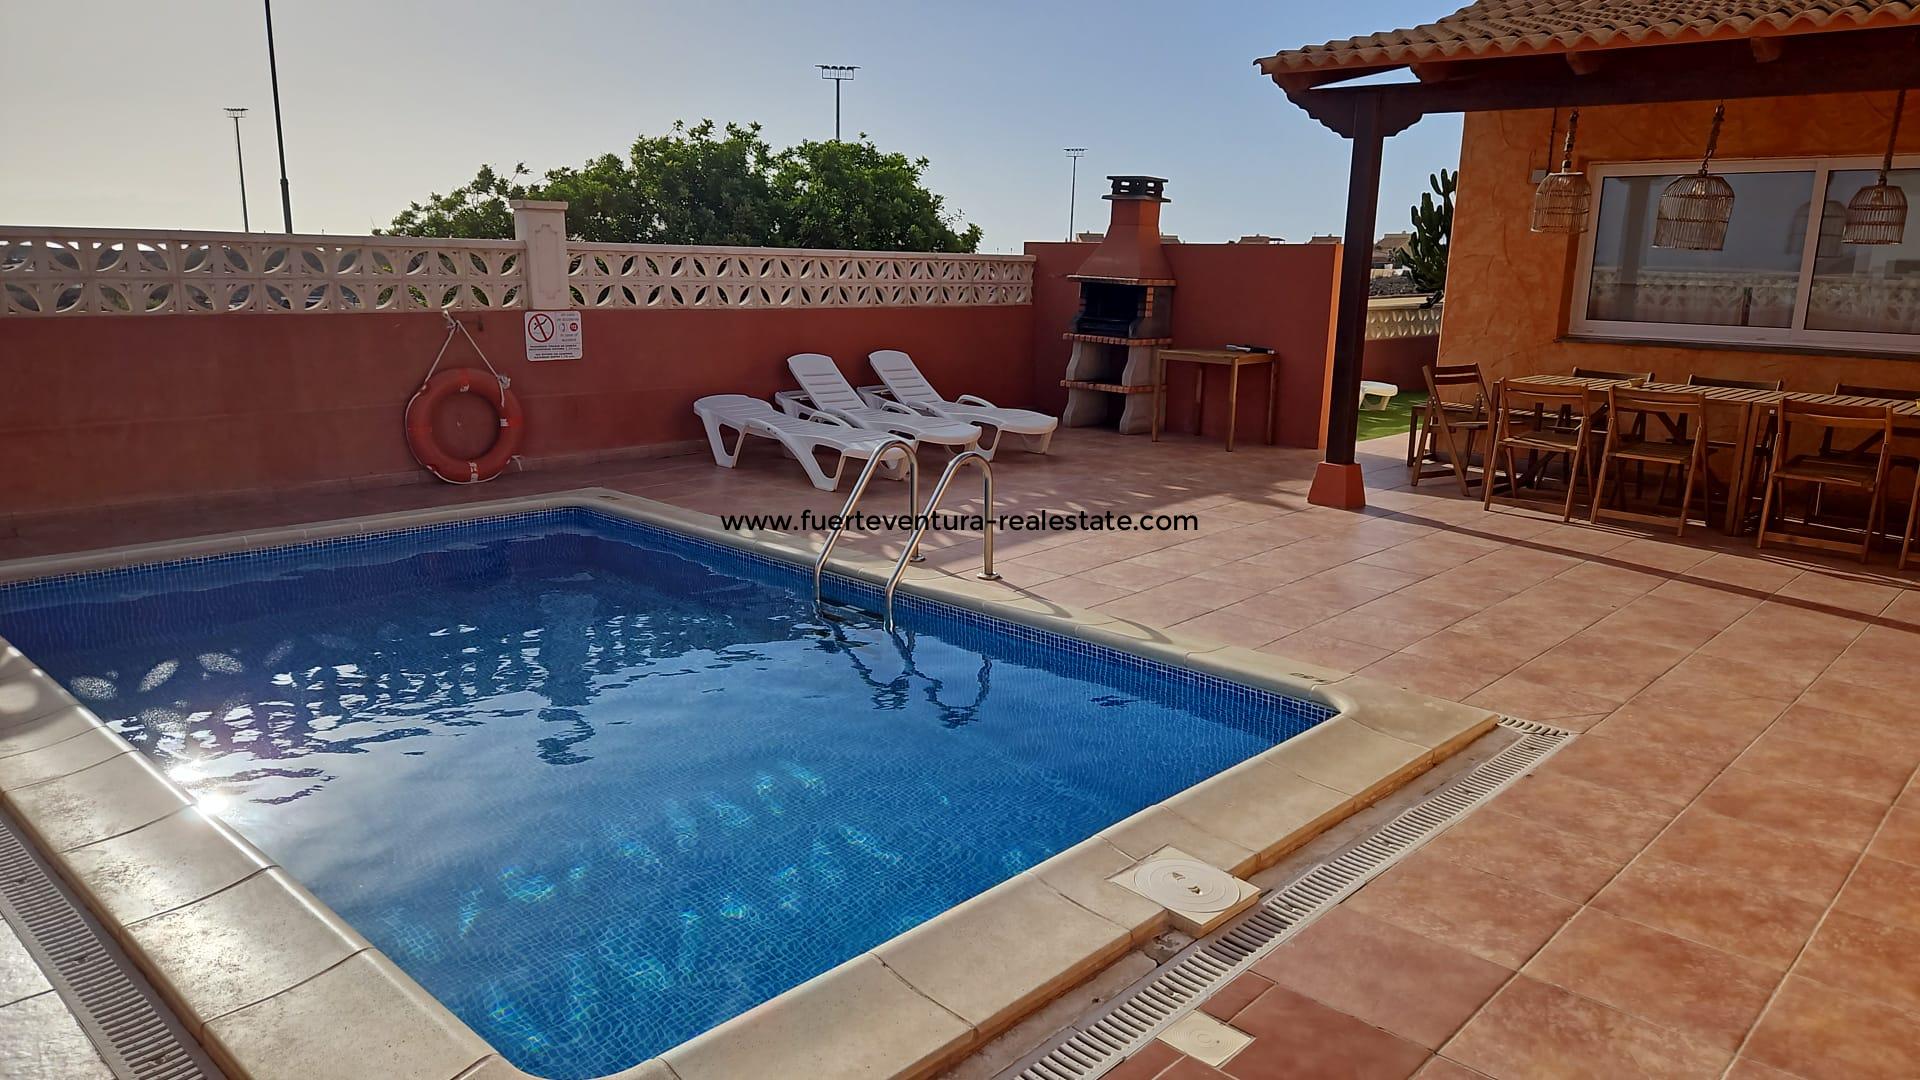  For sale! A beautiful villa with pool and sea views in the residential area of Miralobos in Corralejo